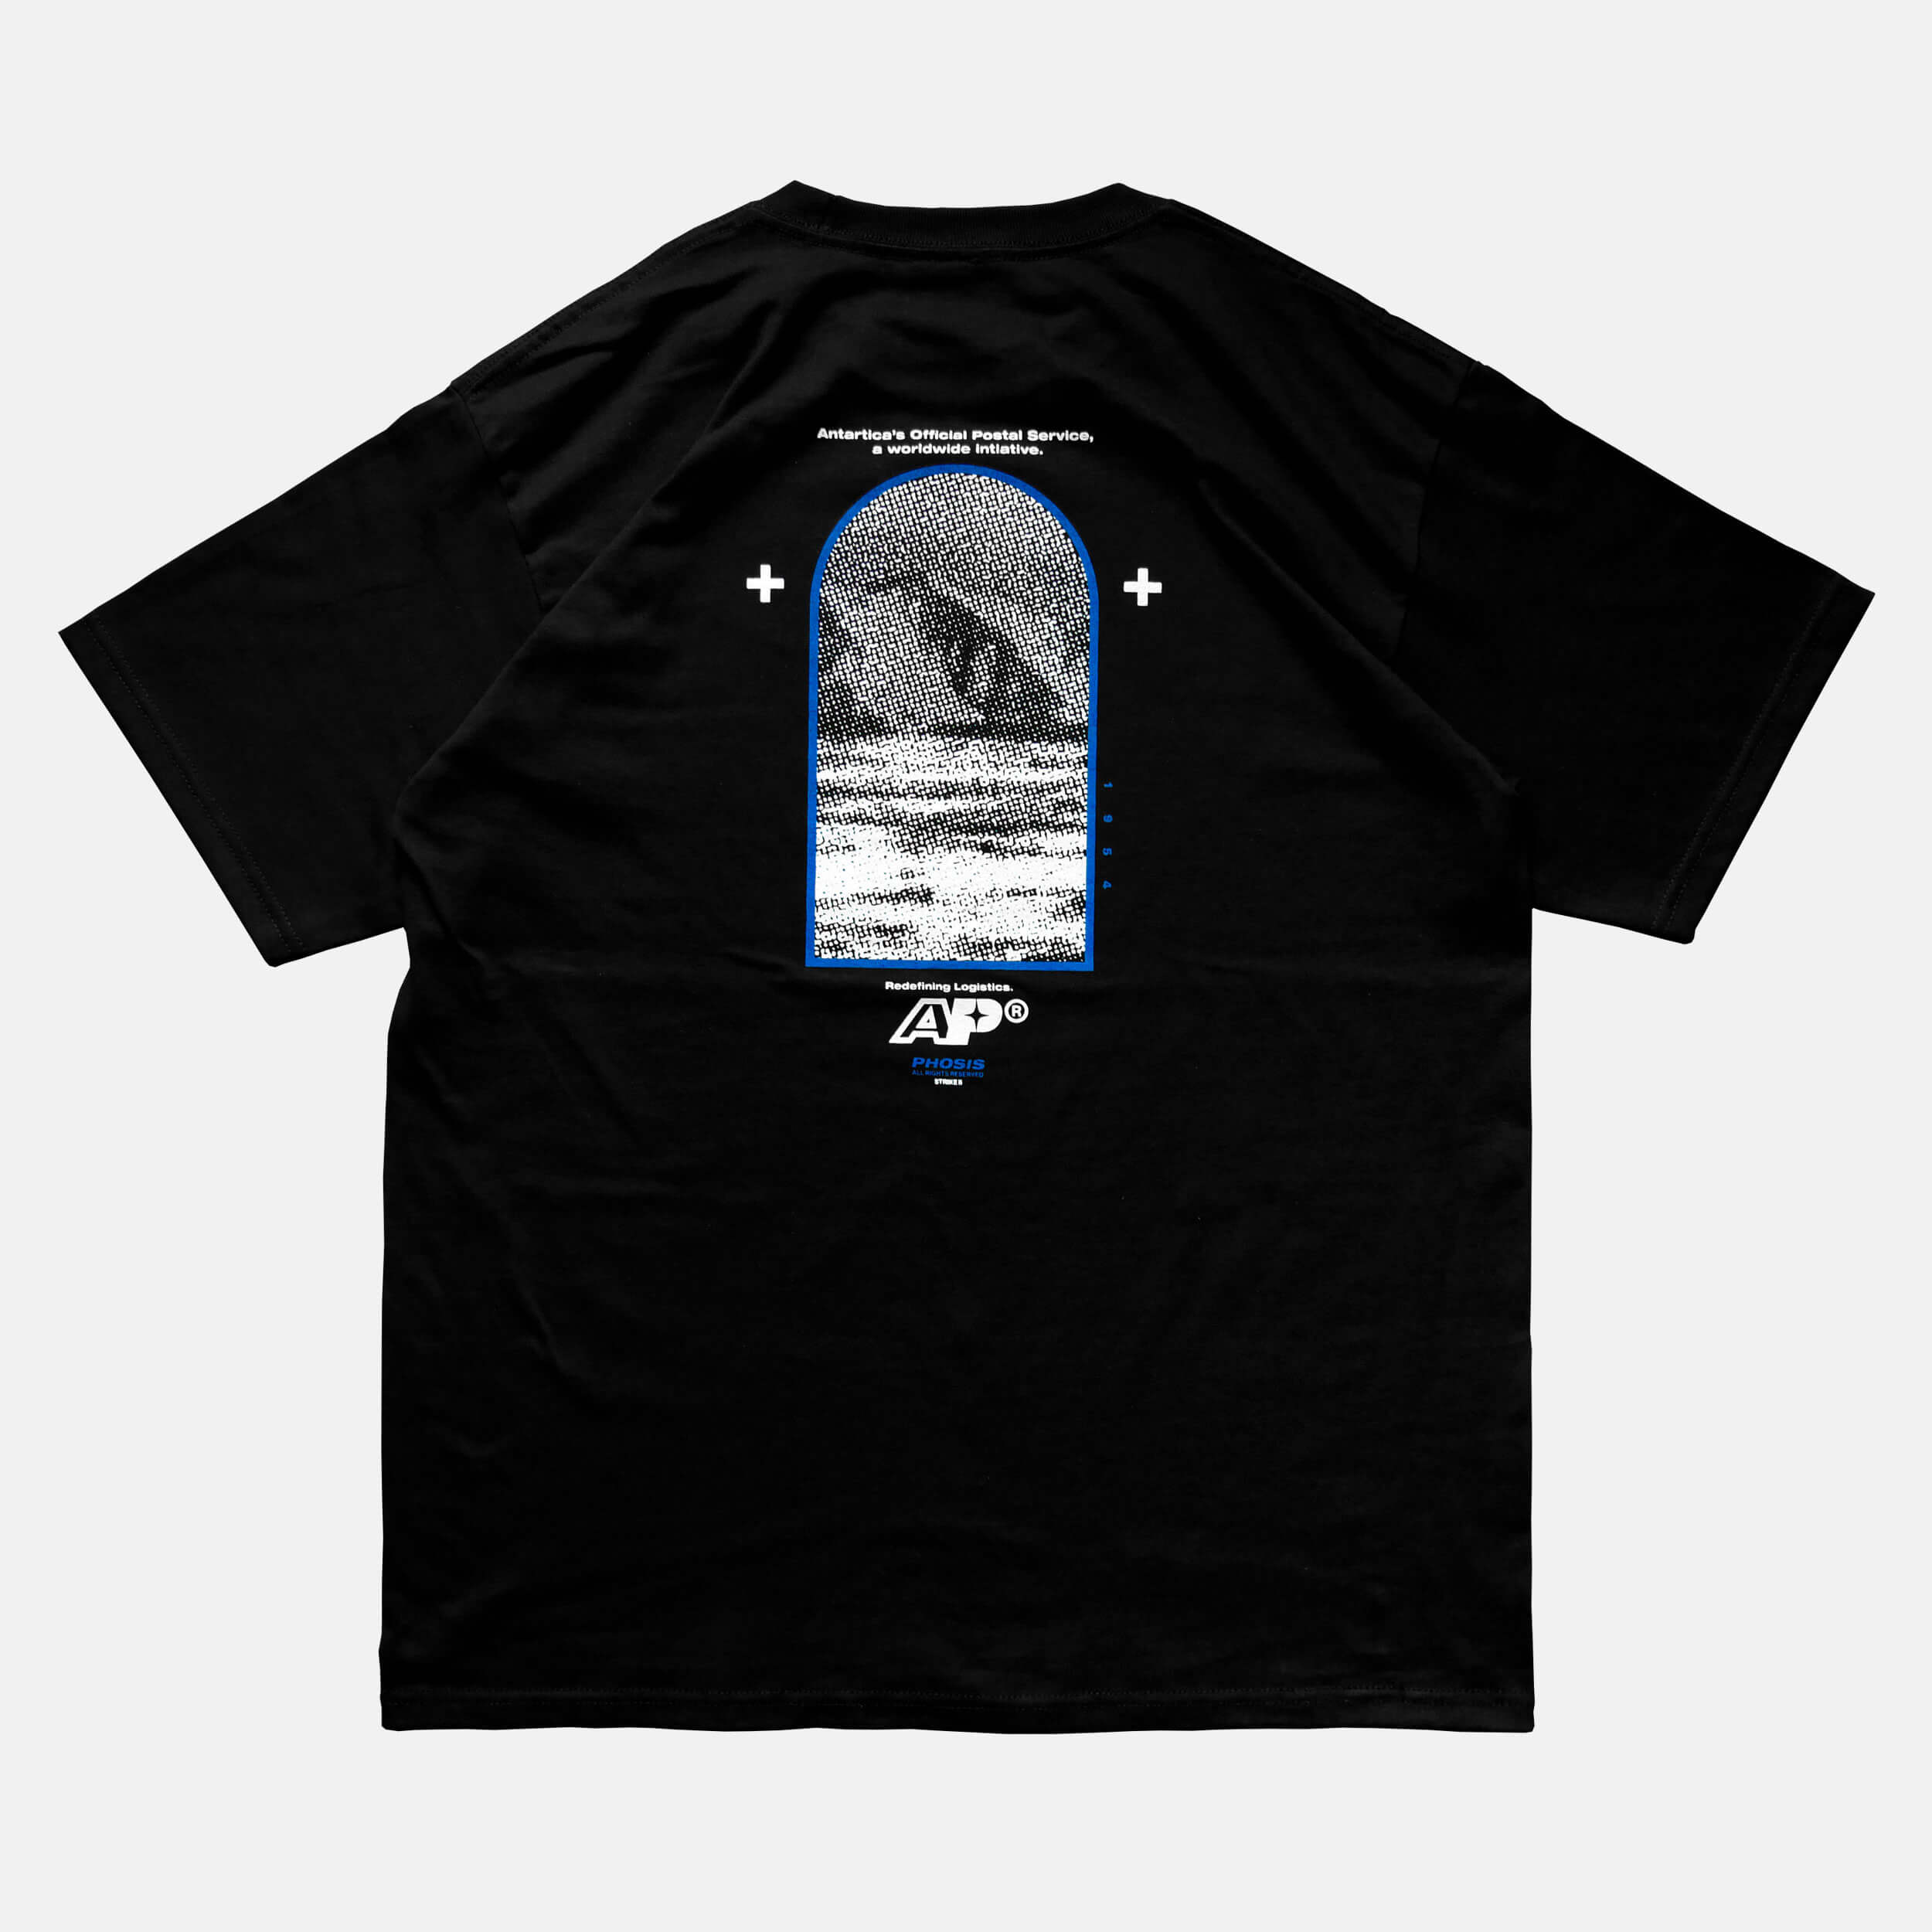 Back view of the screen-pinted ANTARTICA POST black t-shirt from PHOSIS Clothing